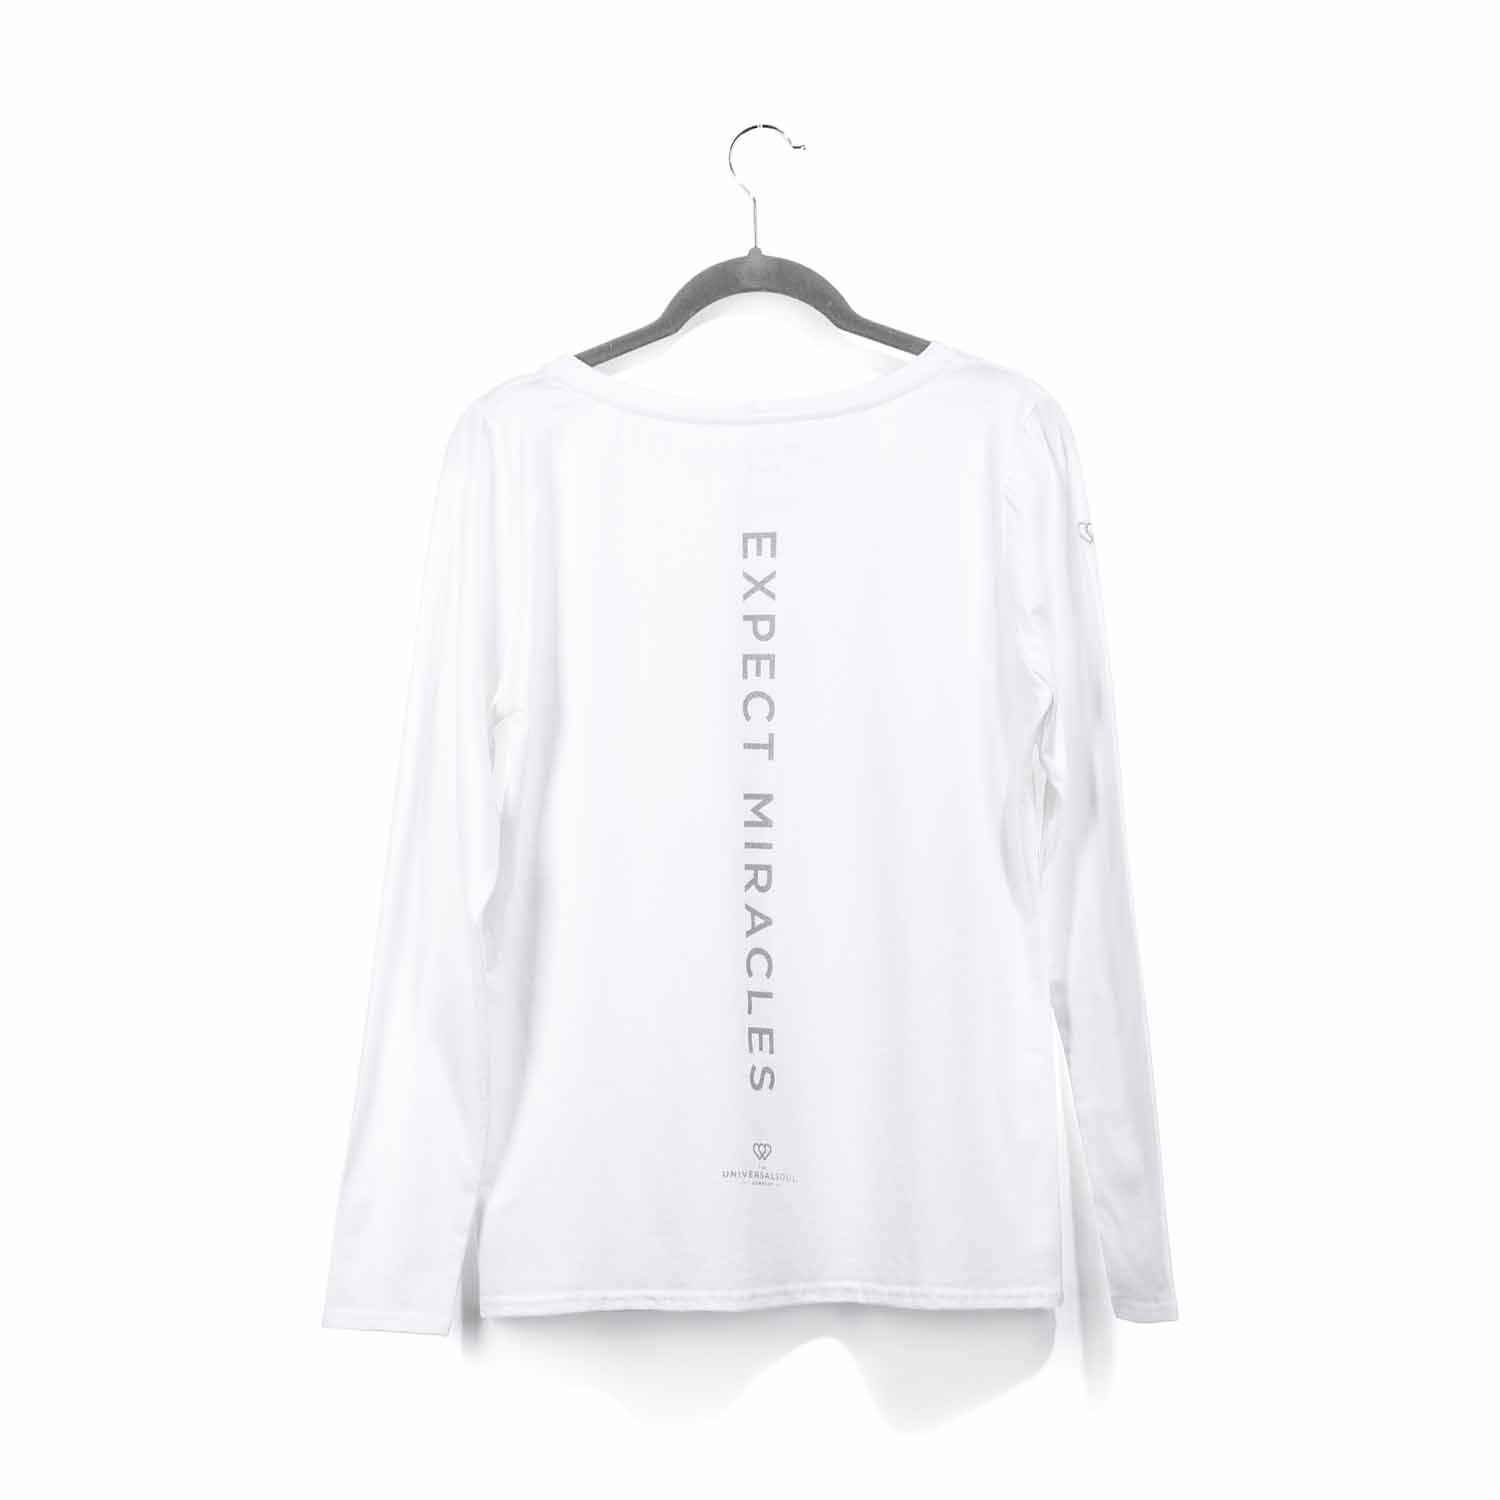 Expect Miracles Hand Embroidered T-shirt - long sleeved - Limited Edition Back - The Universal Soul Company